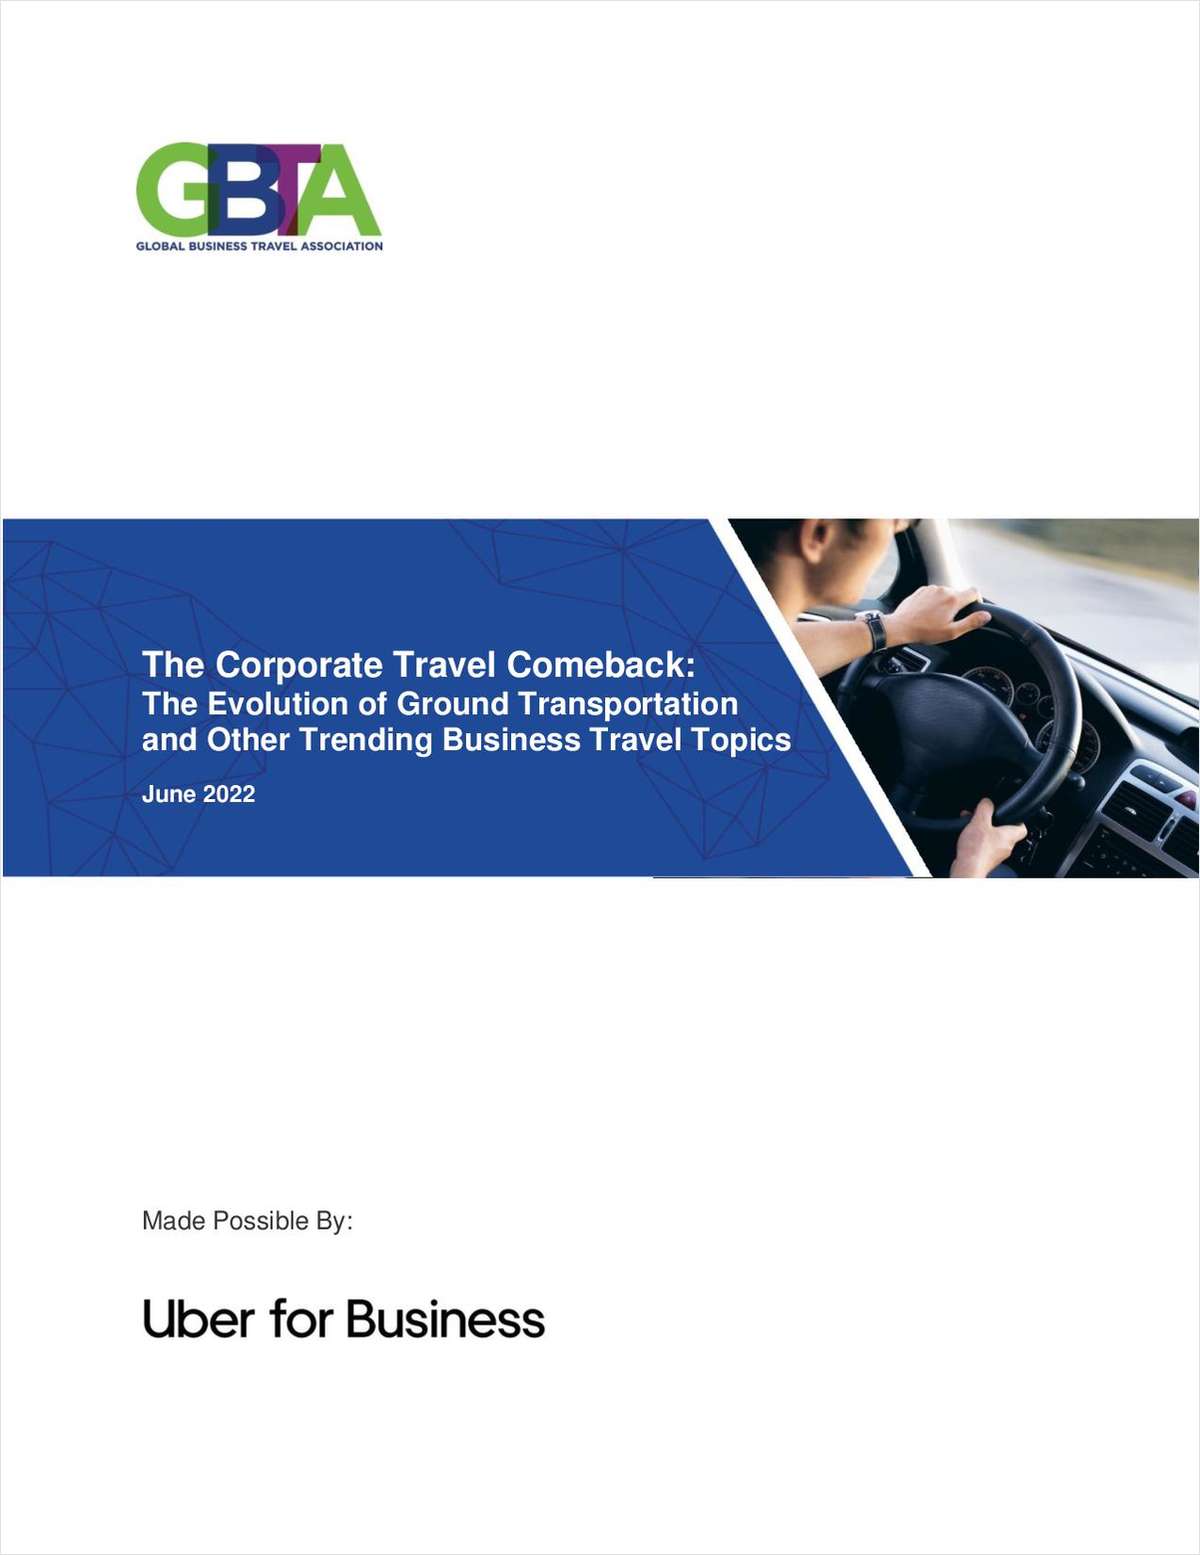 New business travel research from GBTA and Uber for Business